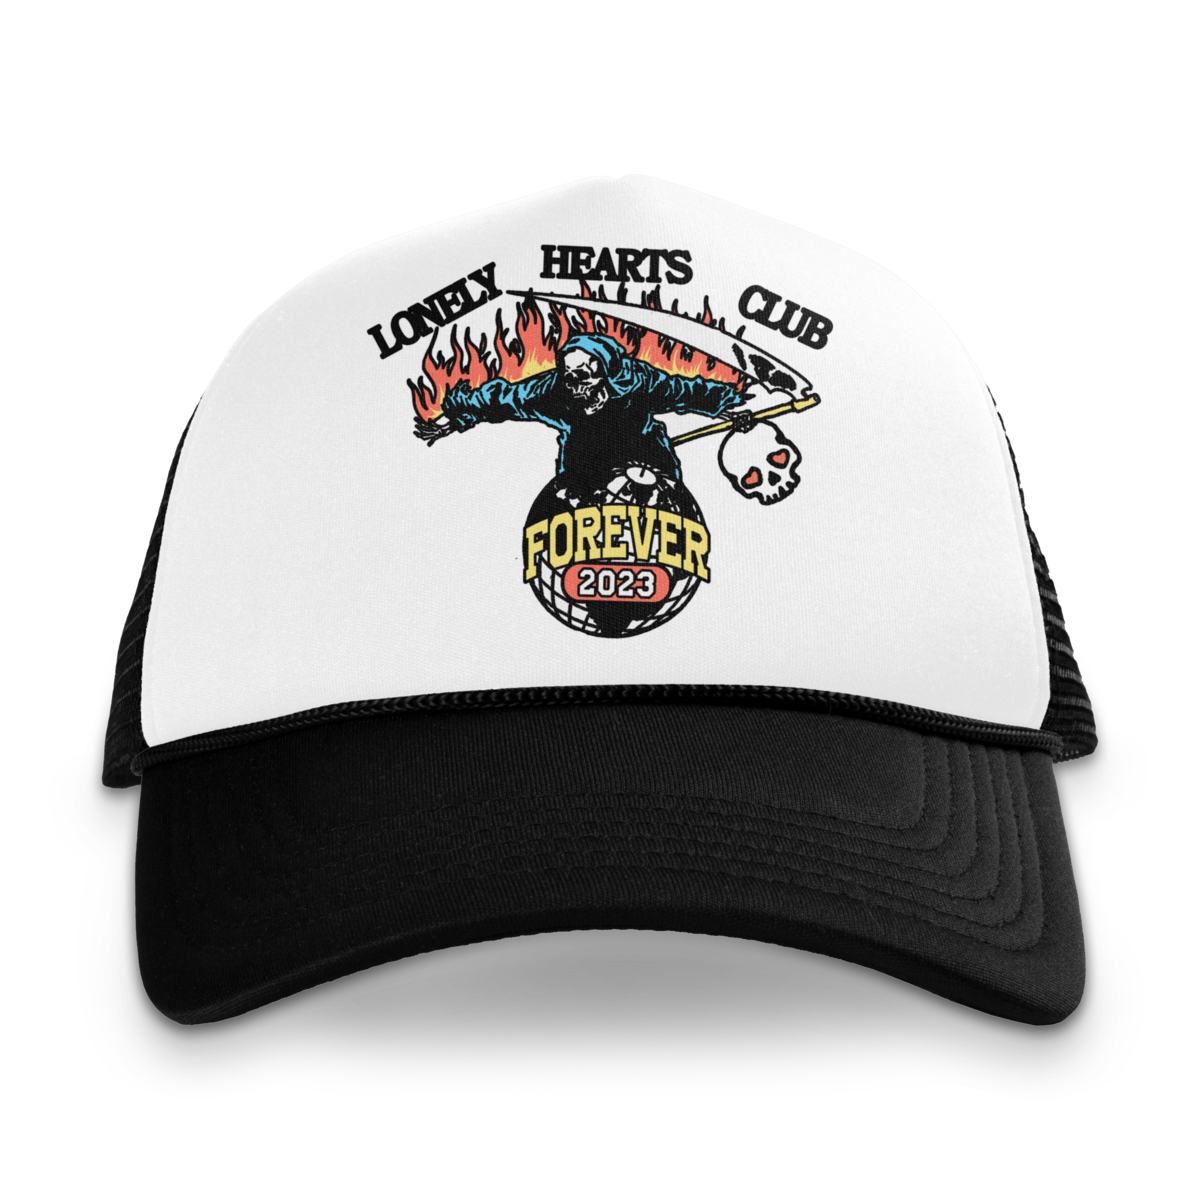 Lonely Hearts Club "Forever" Trucker Hat